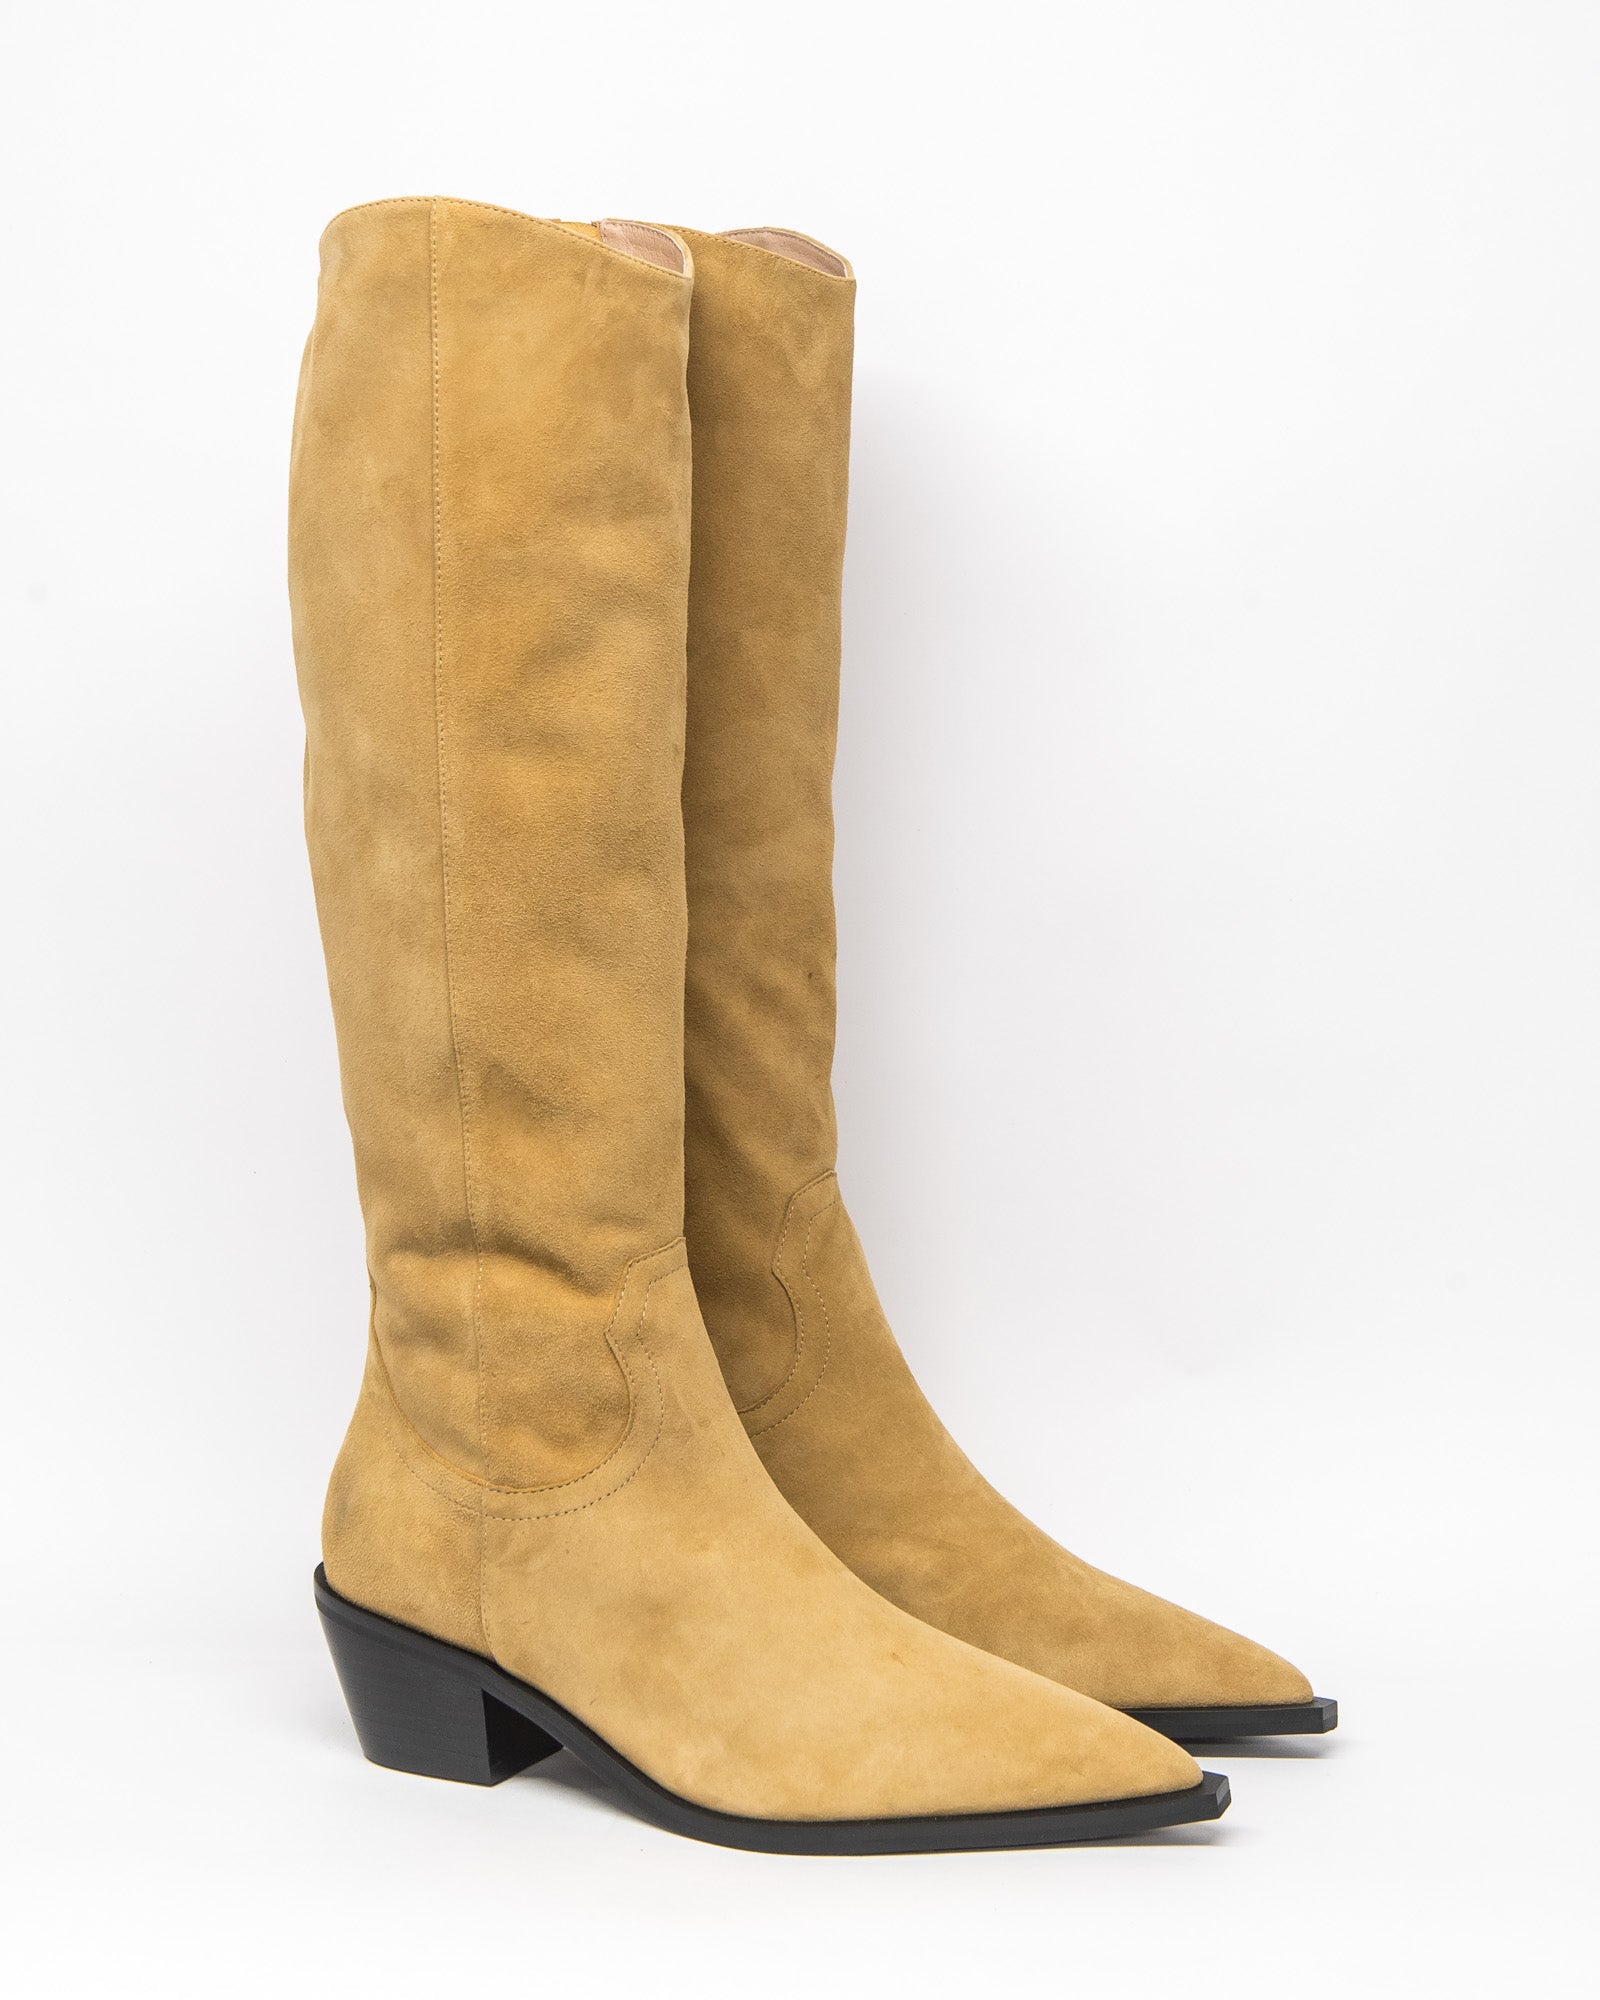 ratify boot - taupe suede